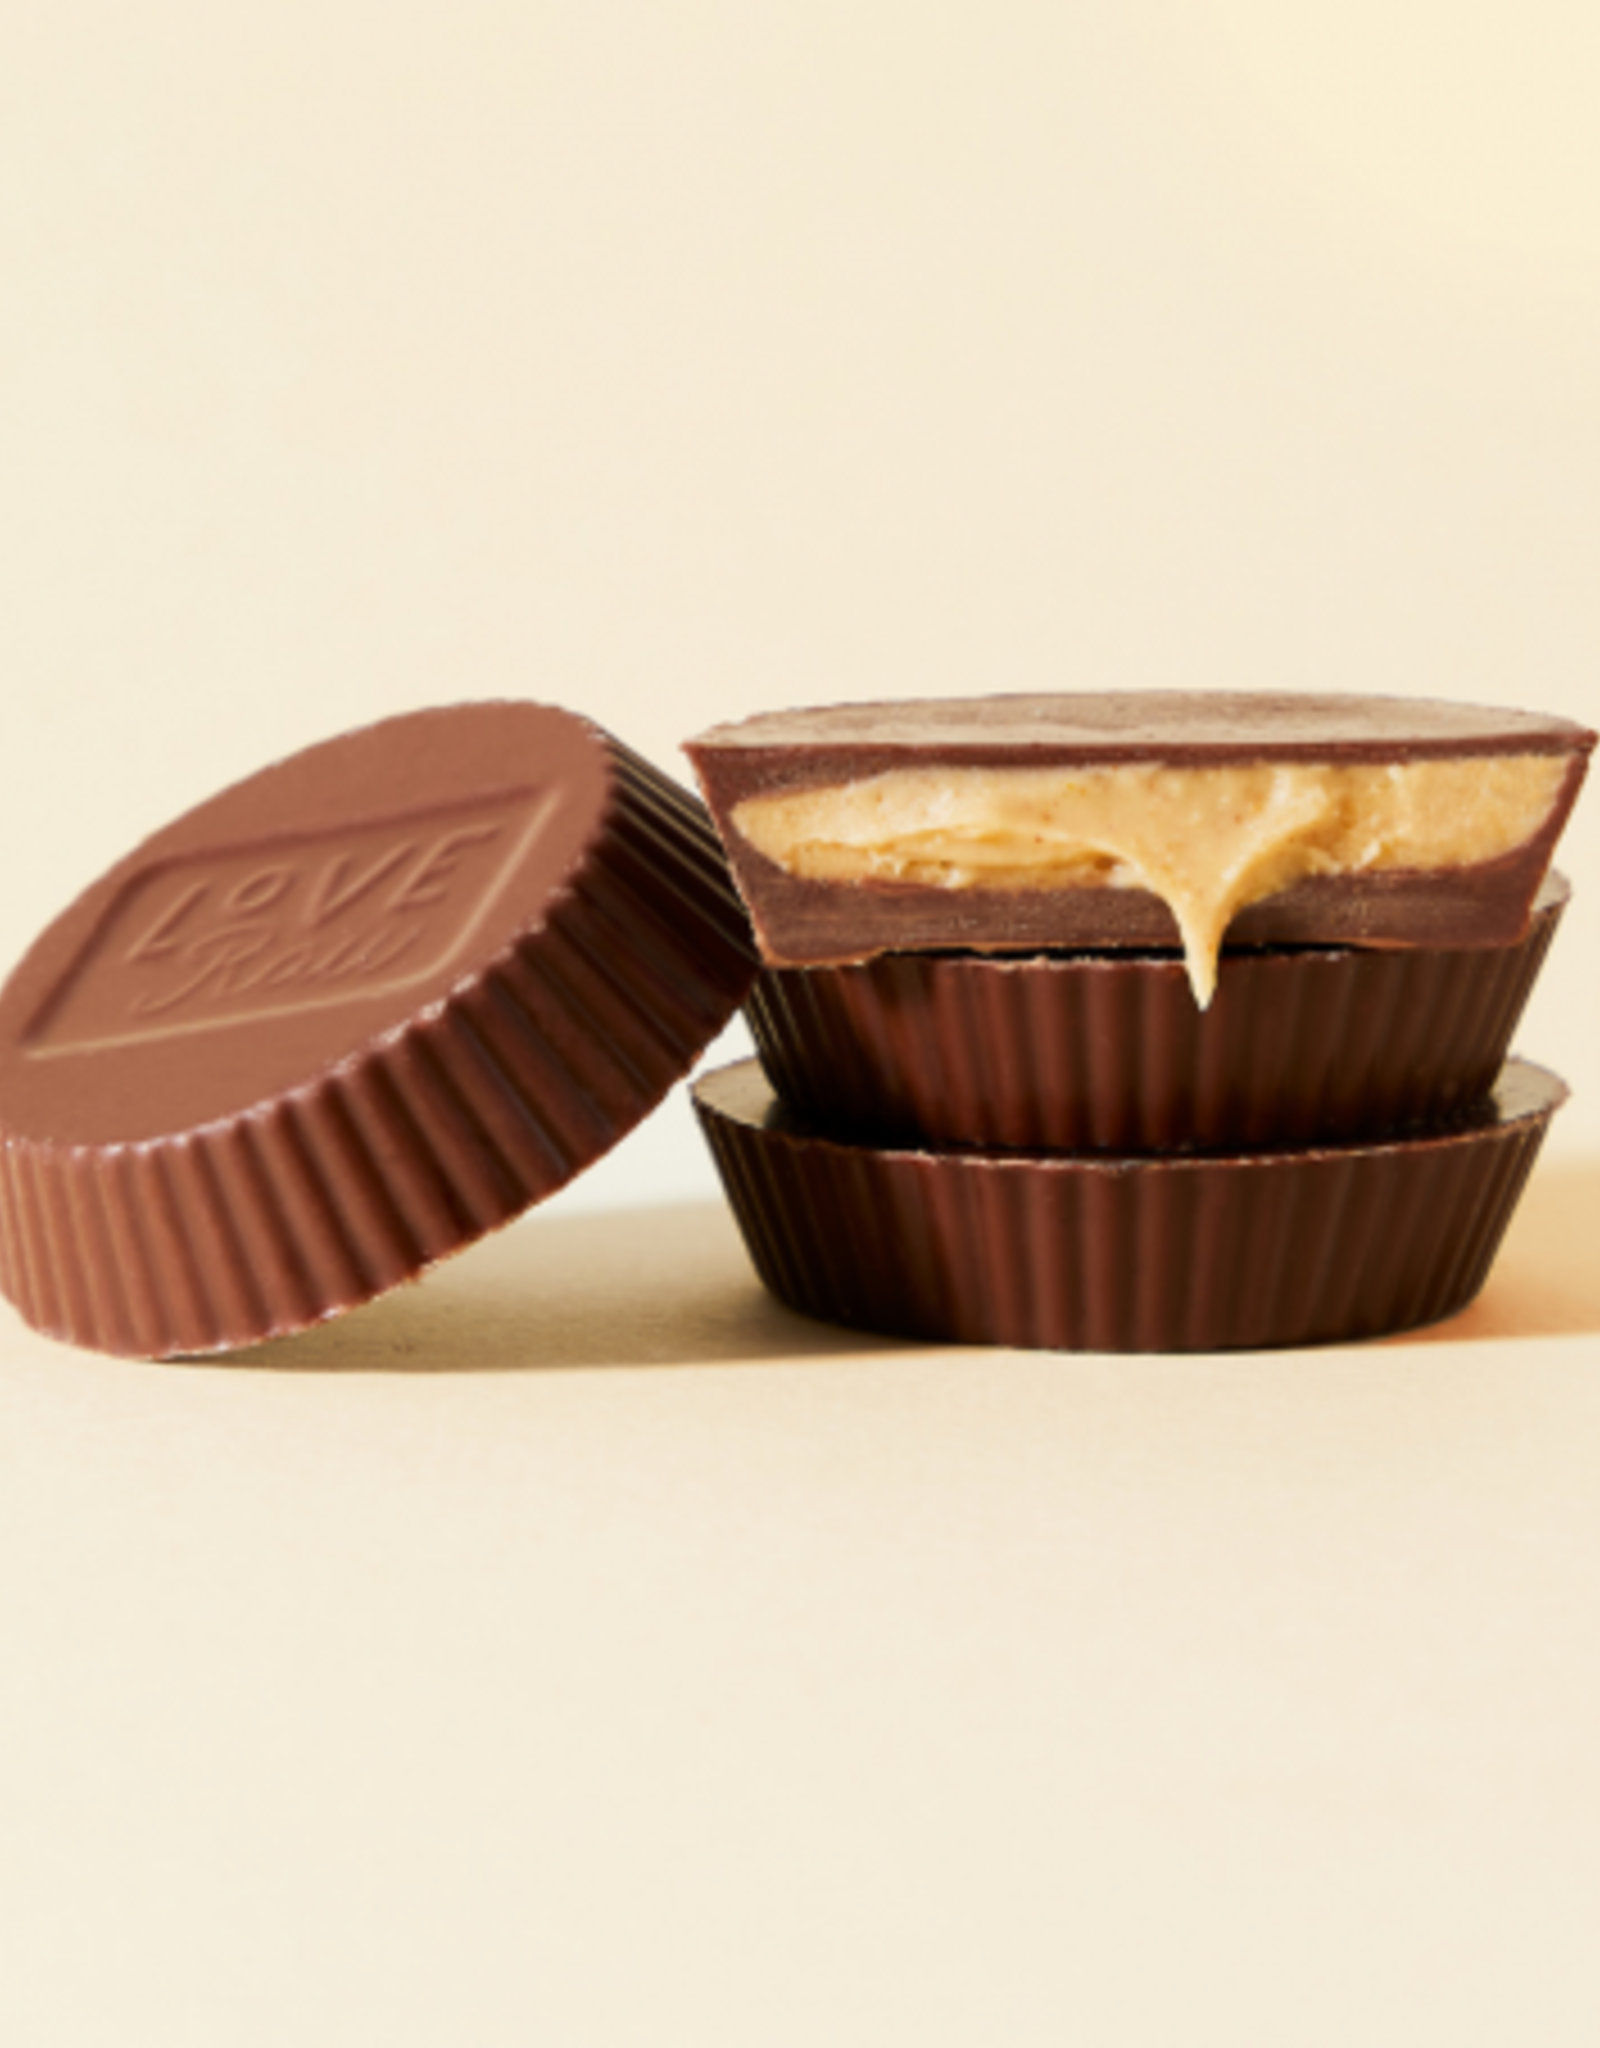 Love Raw Love raw 2 chacolate butter cups peanut butter 34g